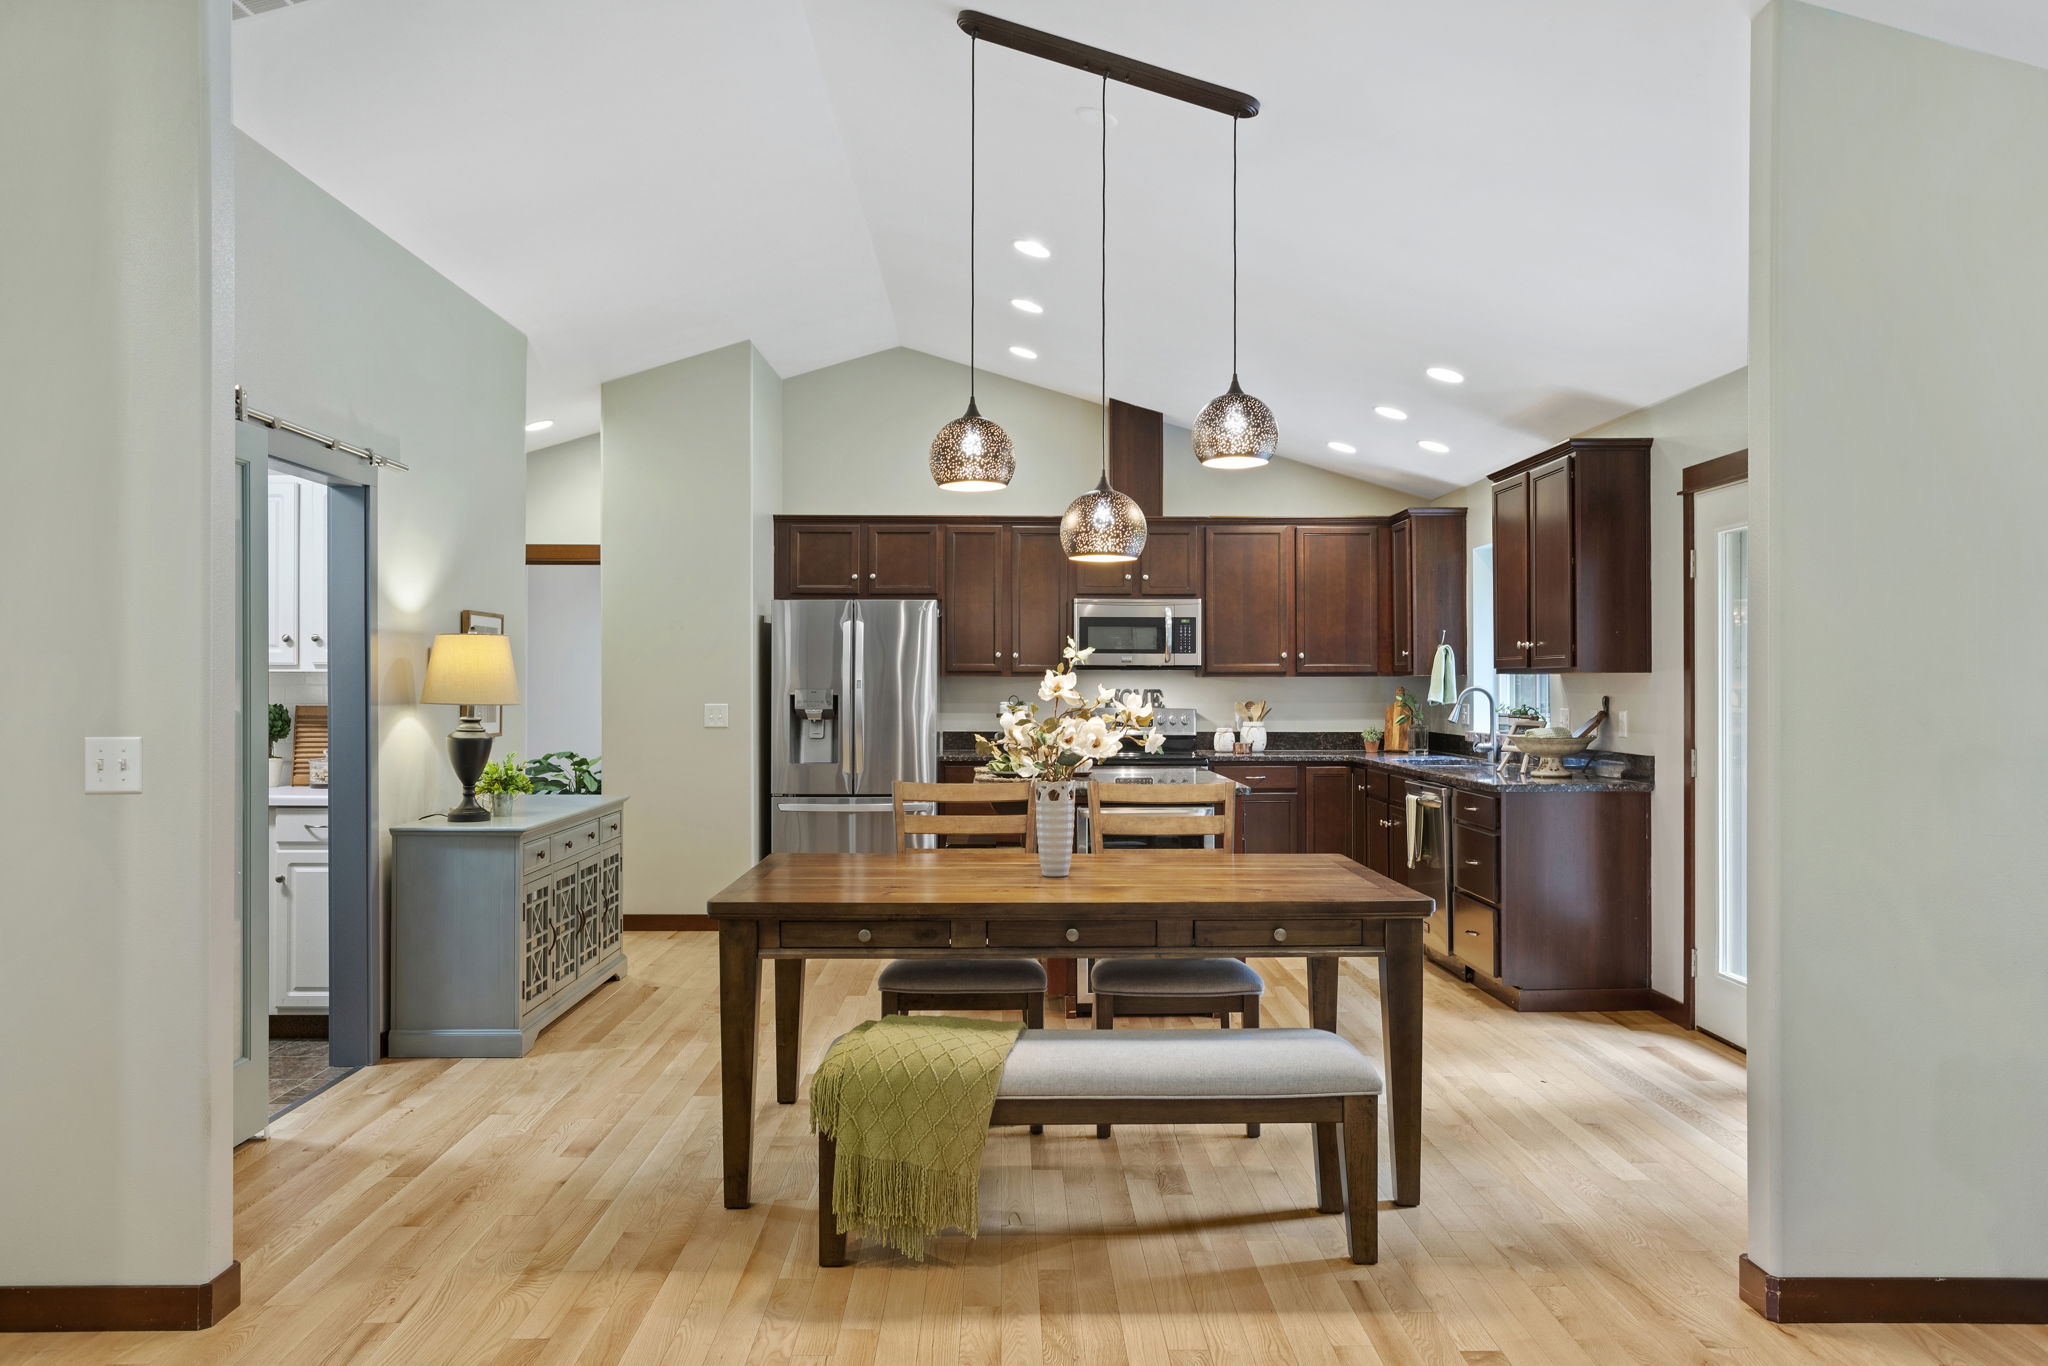 Great vaulted ceilings are carried into the kitchen and dining rooms light and bright rooms!